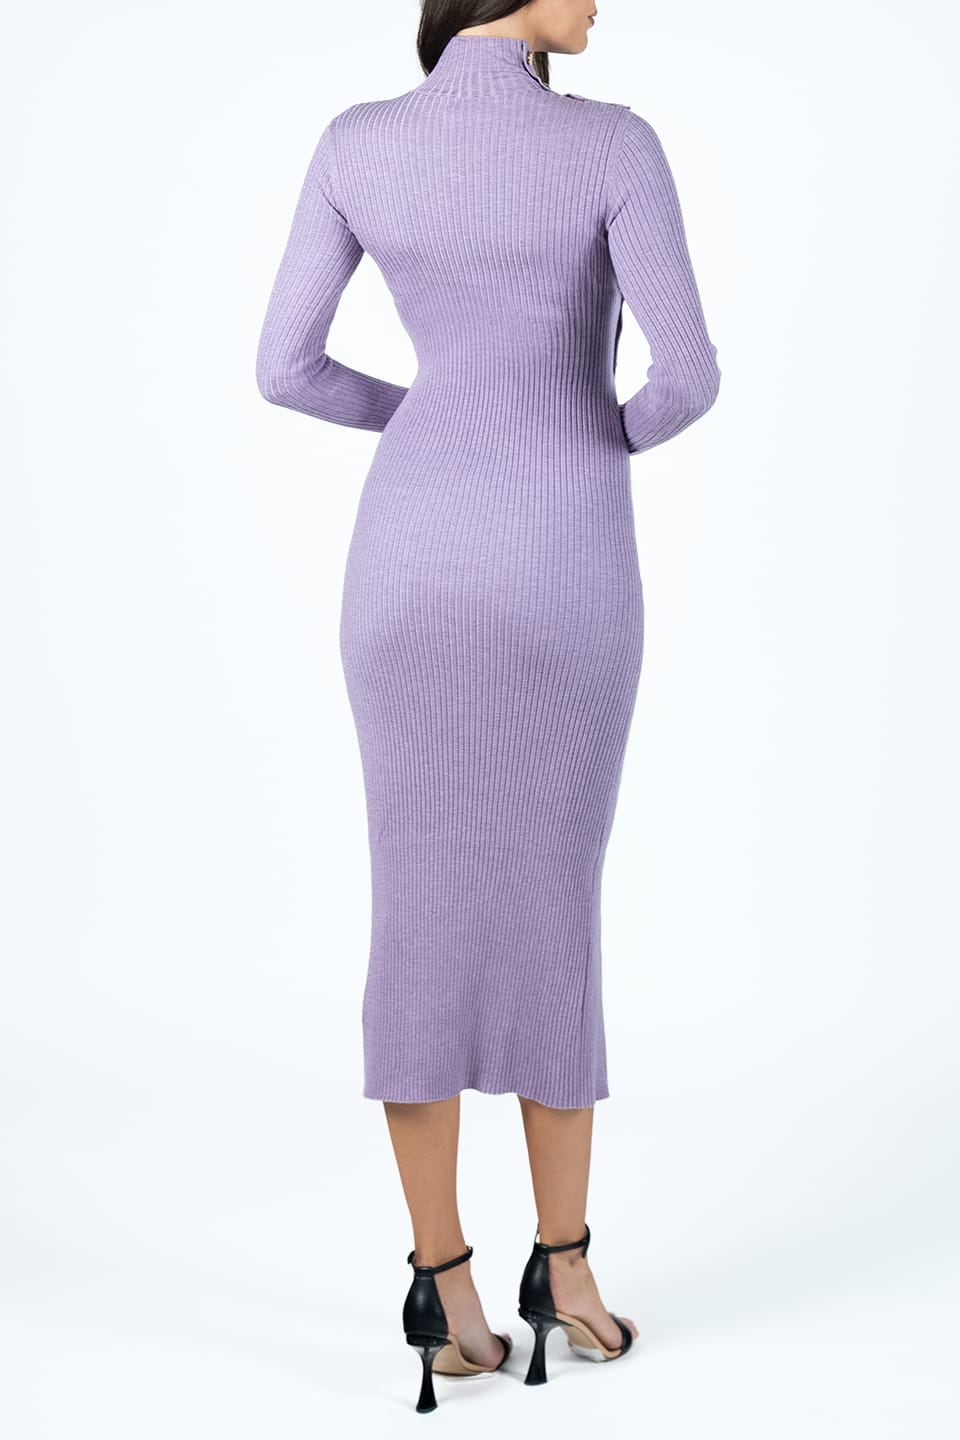 Designer Violet Midi dresses, shop online with free delivery in UAE. Product gallery 4